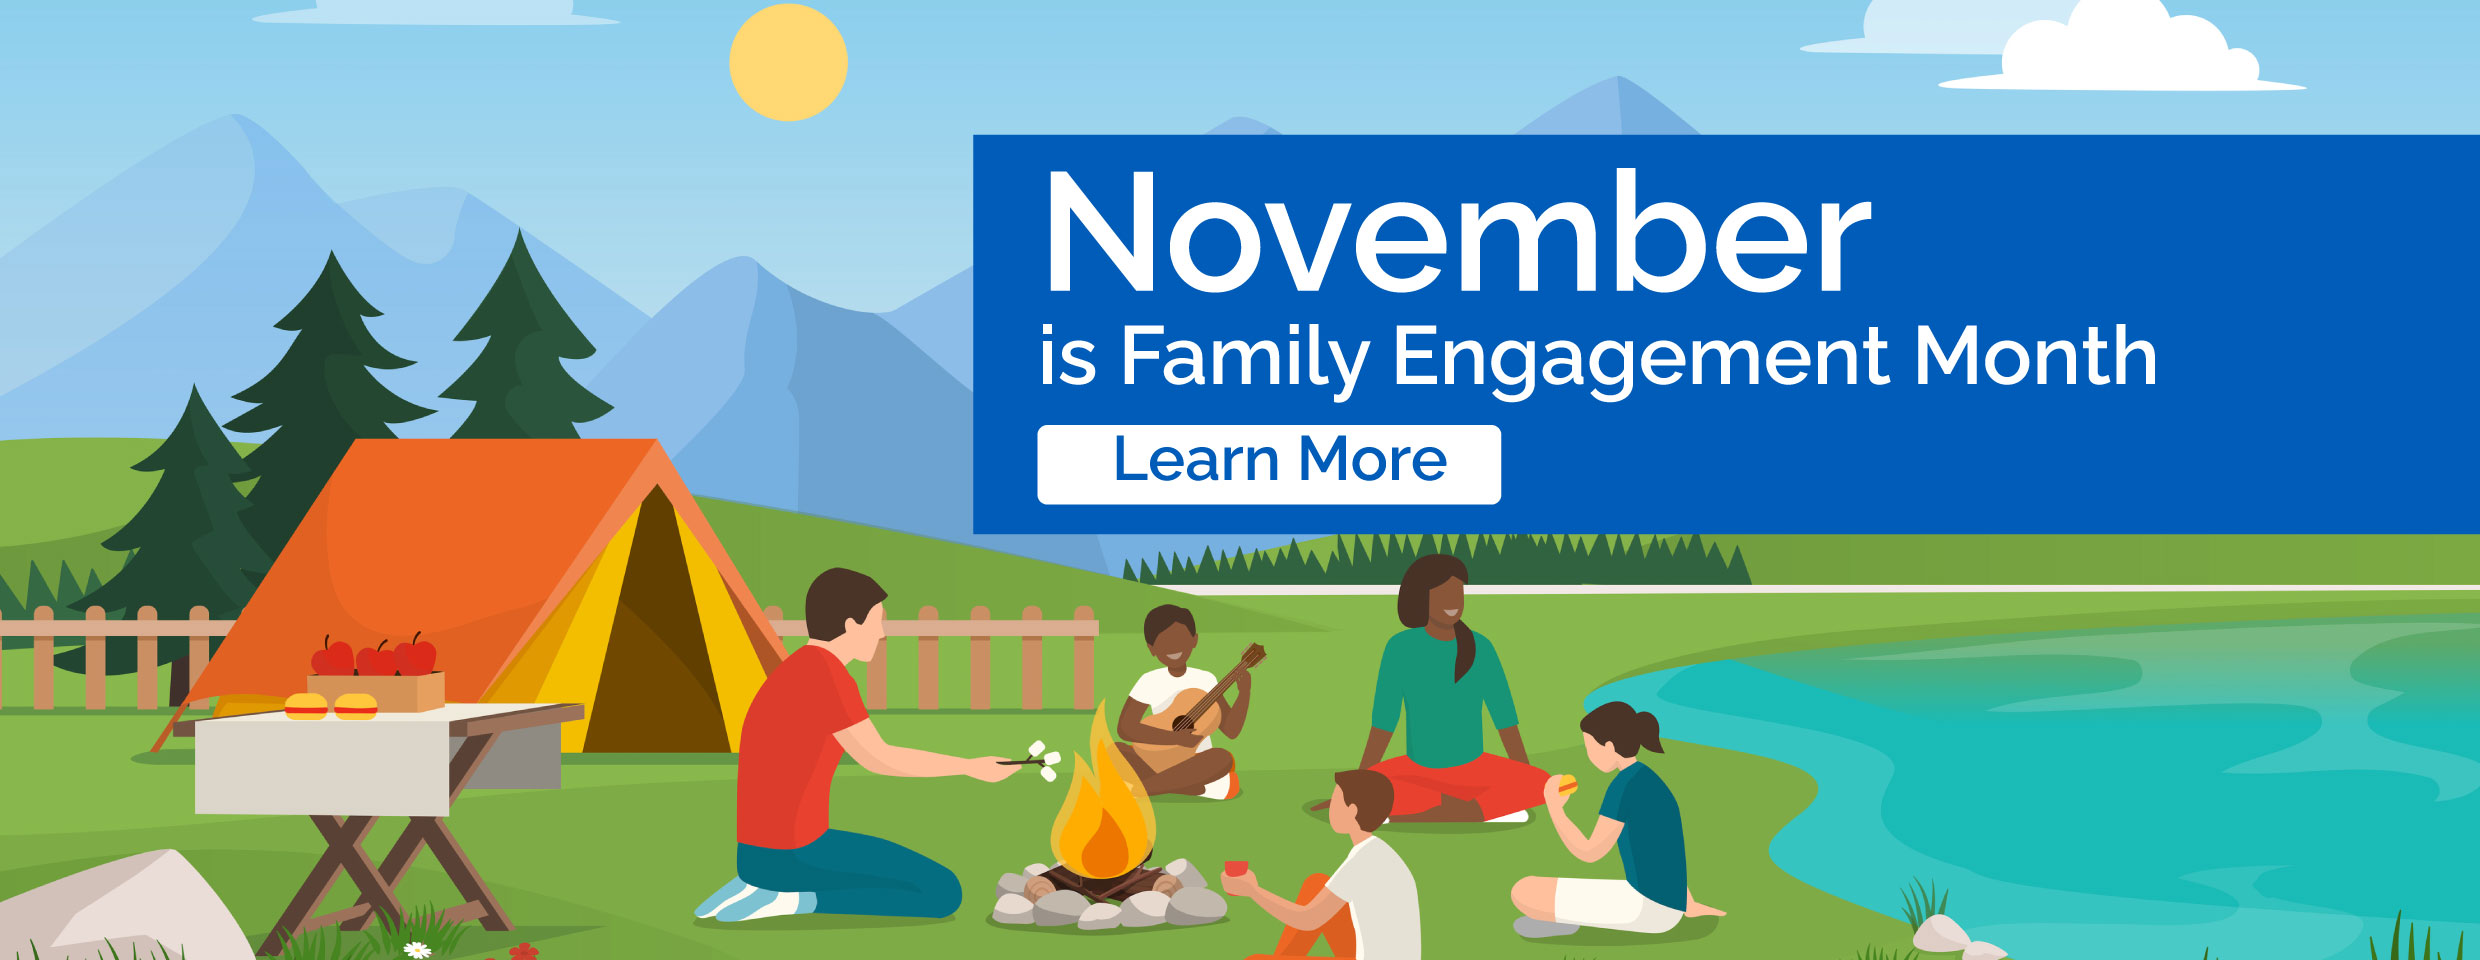 November is family engagement month. Learn more. Family sitting around campfire